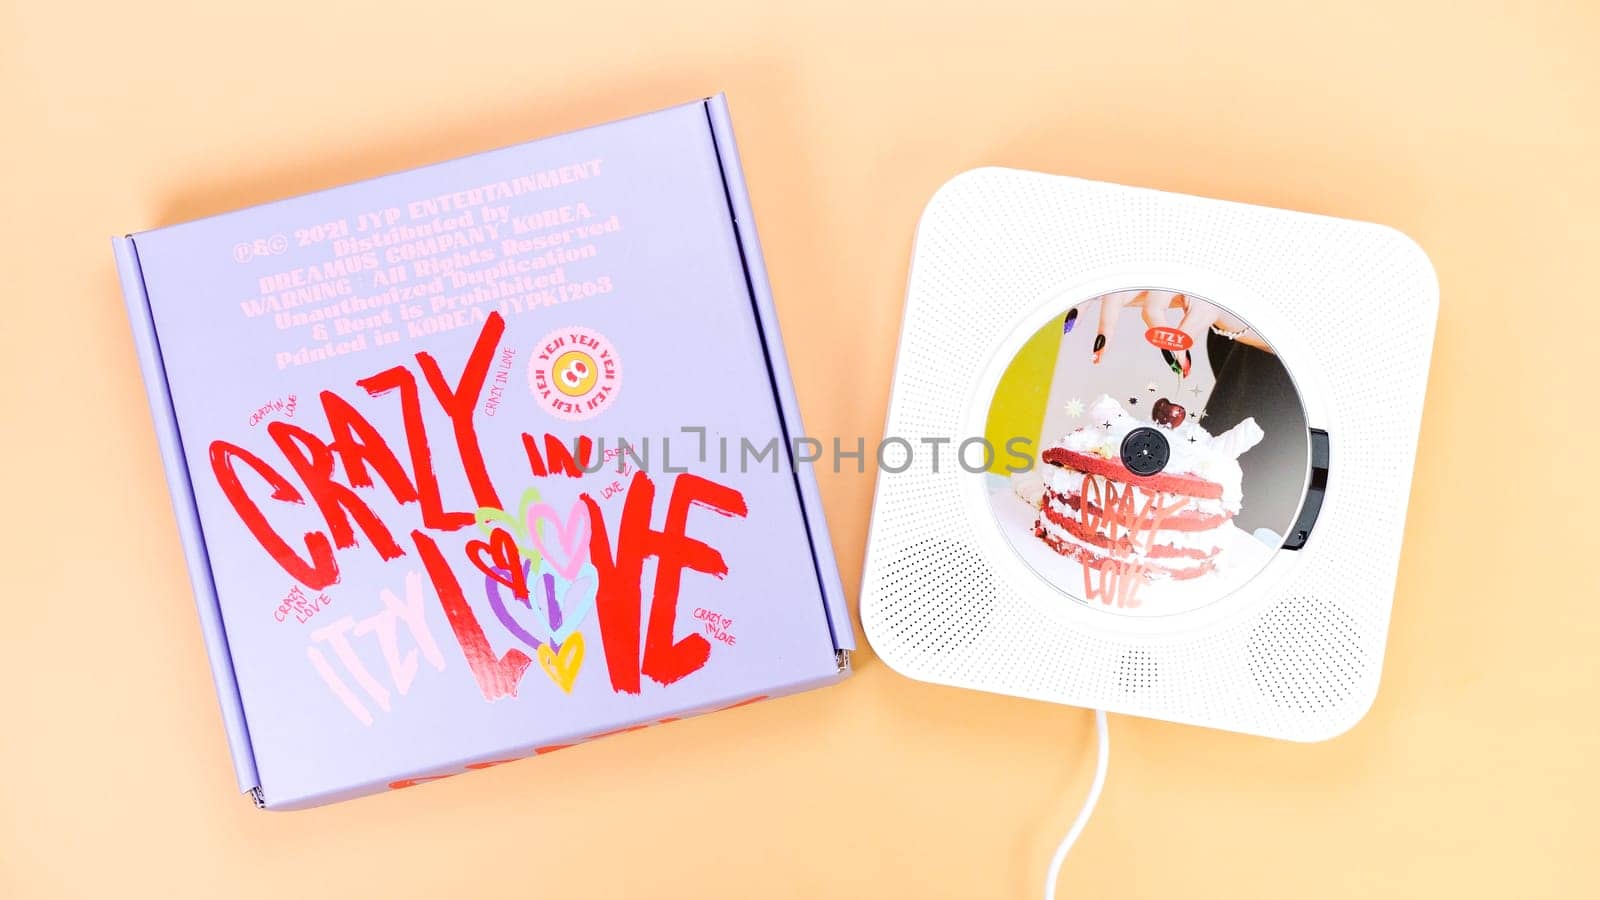 K-pop group Itzy CRAZY IN LOVE 1st Album on yellow background. Special edition music CD. South Korean girl group Itzy. Space for text. Gatineau, QC Canada - March 10 2023.